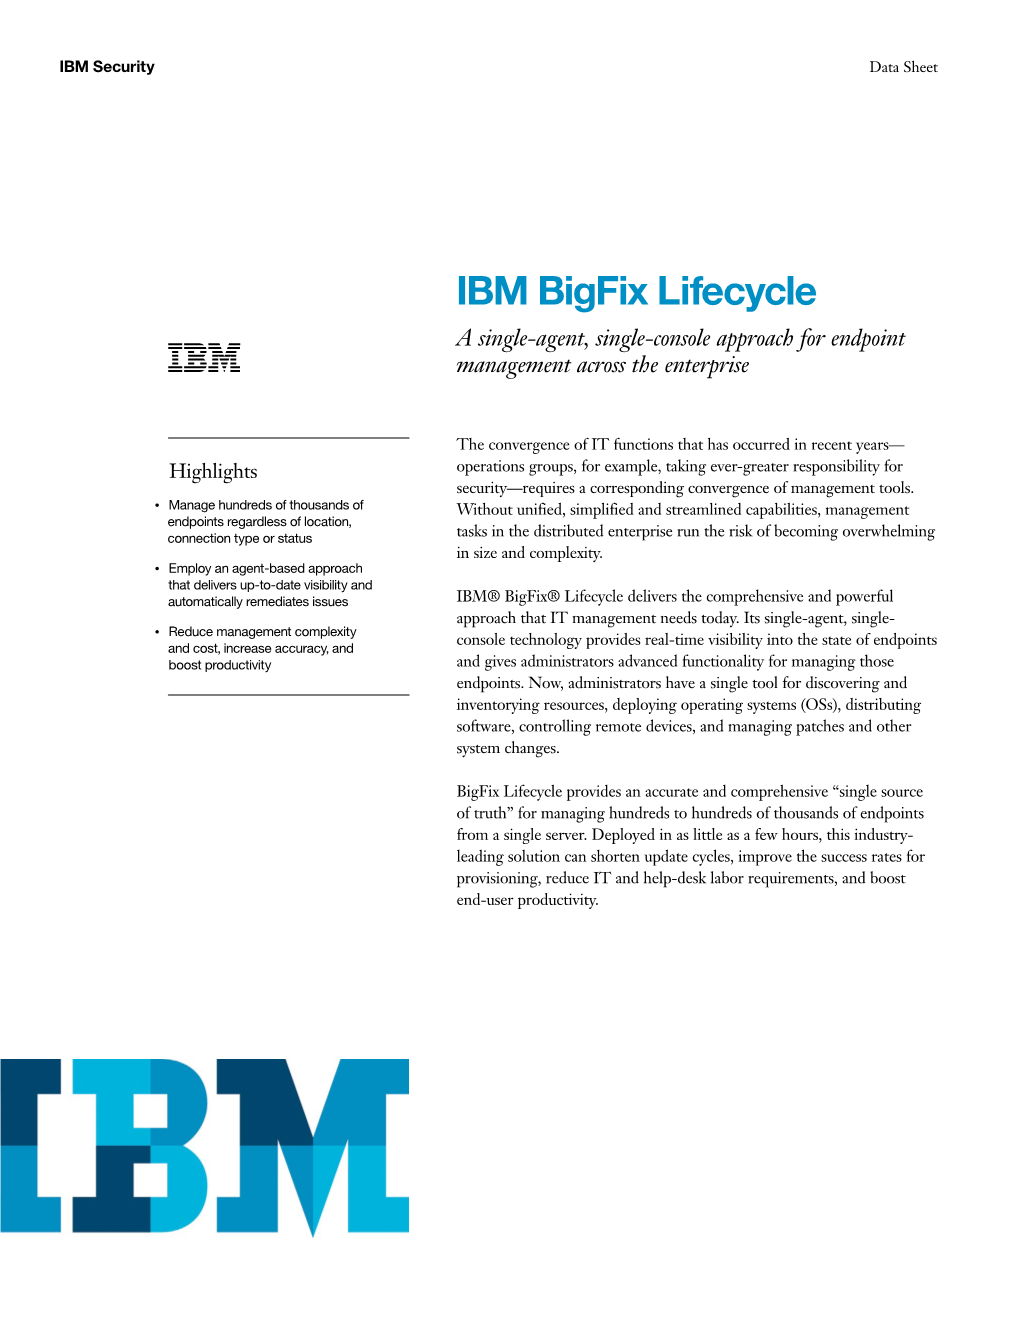 IBM Bigfix Lifecycle a Single-Agent, Single-Console Approach for Endpoint Management Across the Enterprise